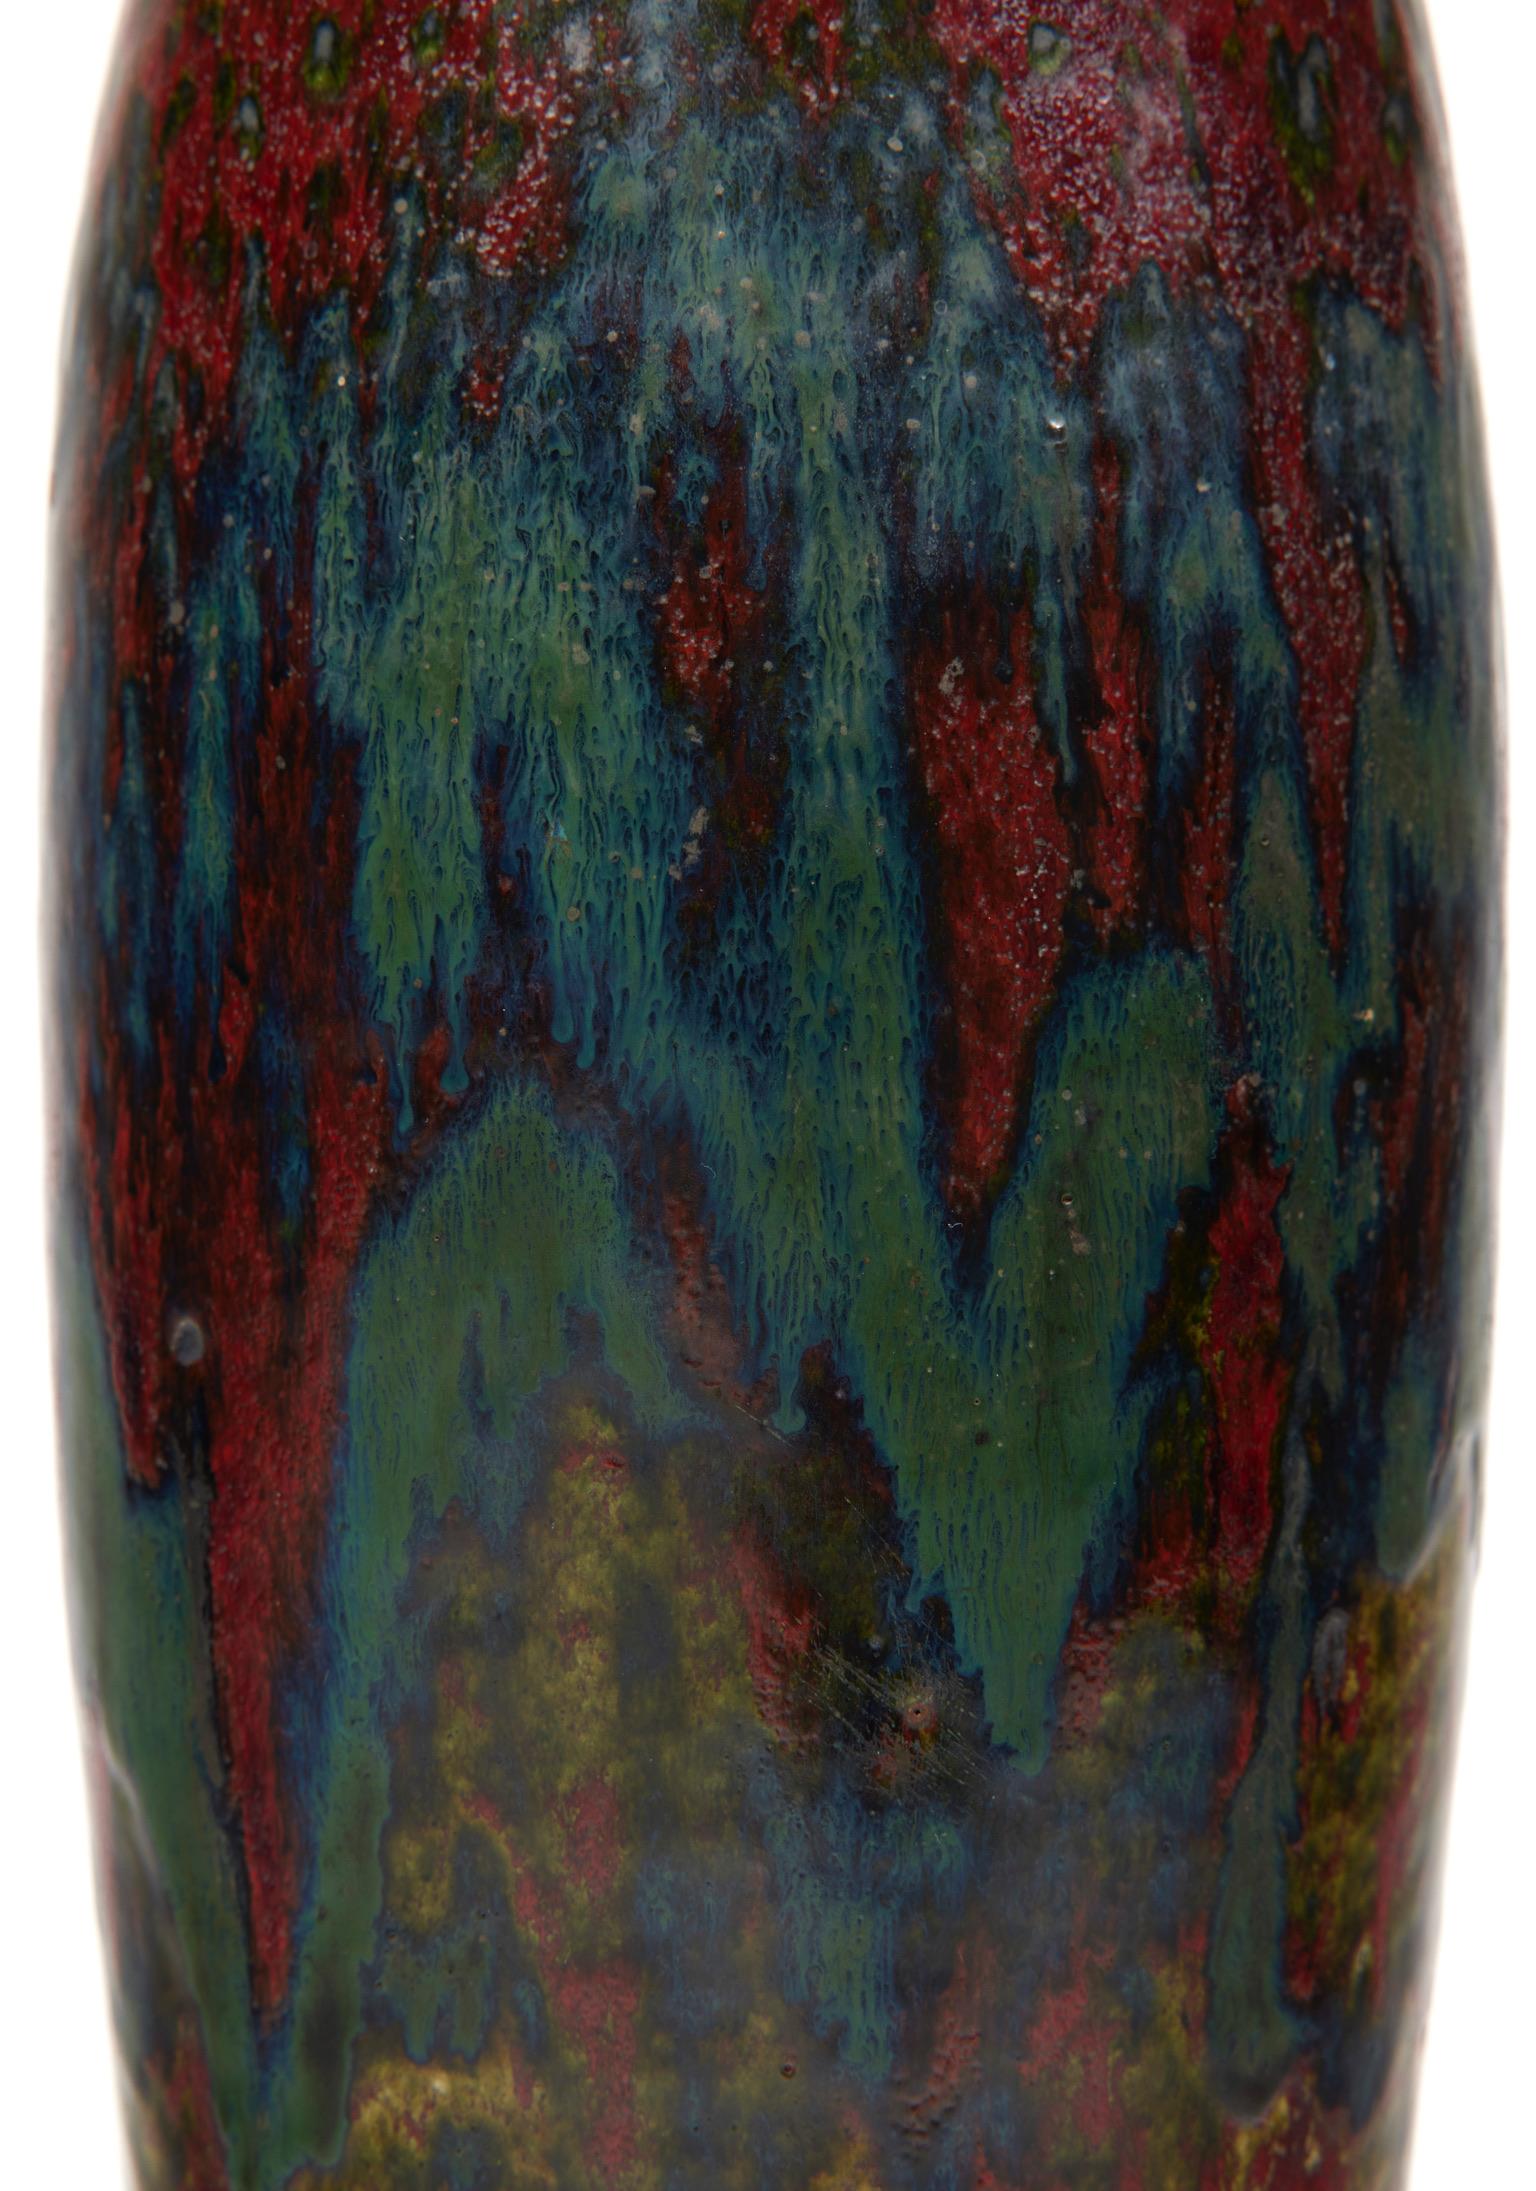 Ovoid stoneware vase with hemmed neck, oxblood red, green and blue enamel.

Signature of a stamp in hollow 